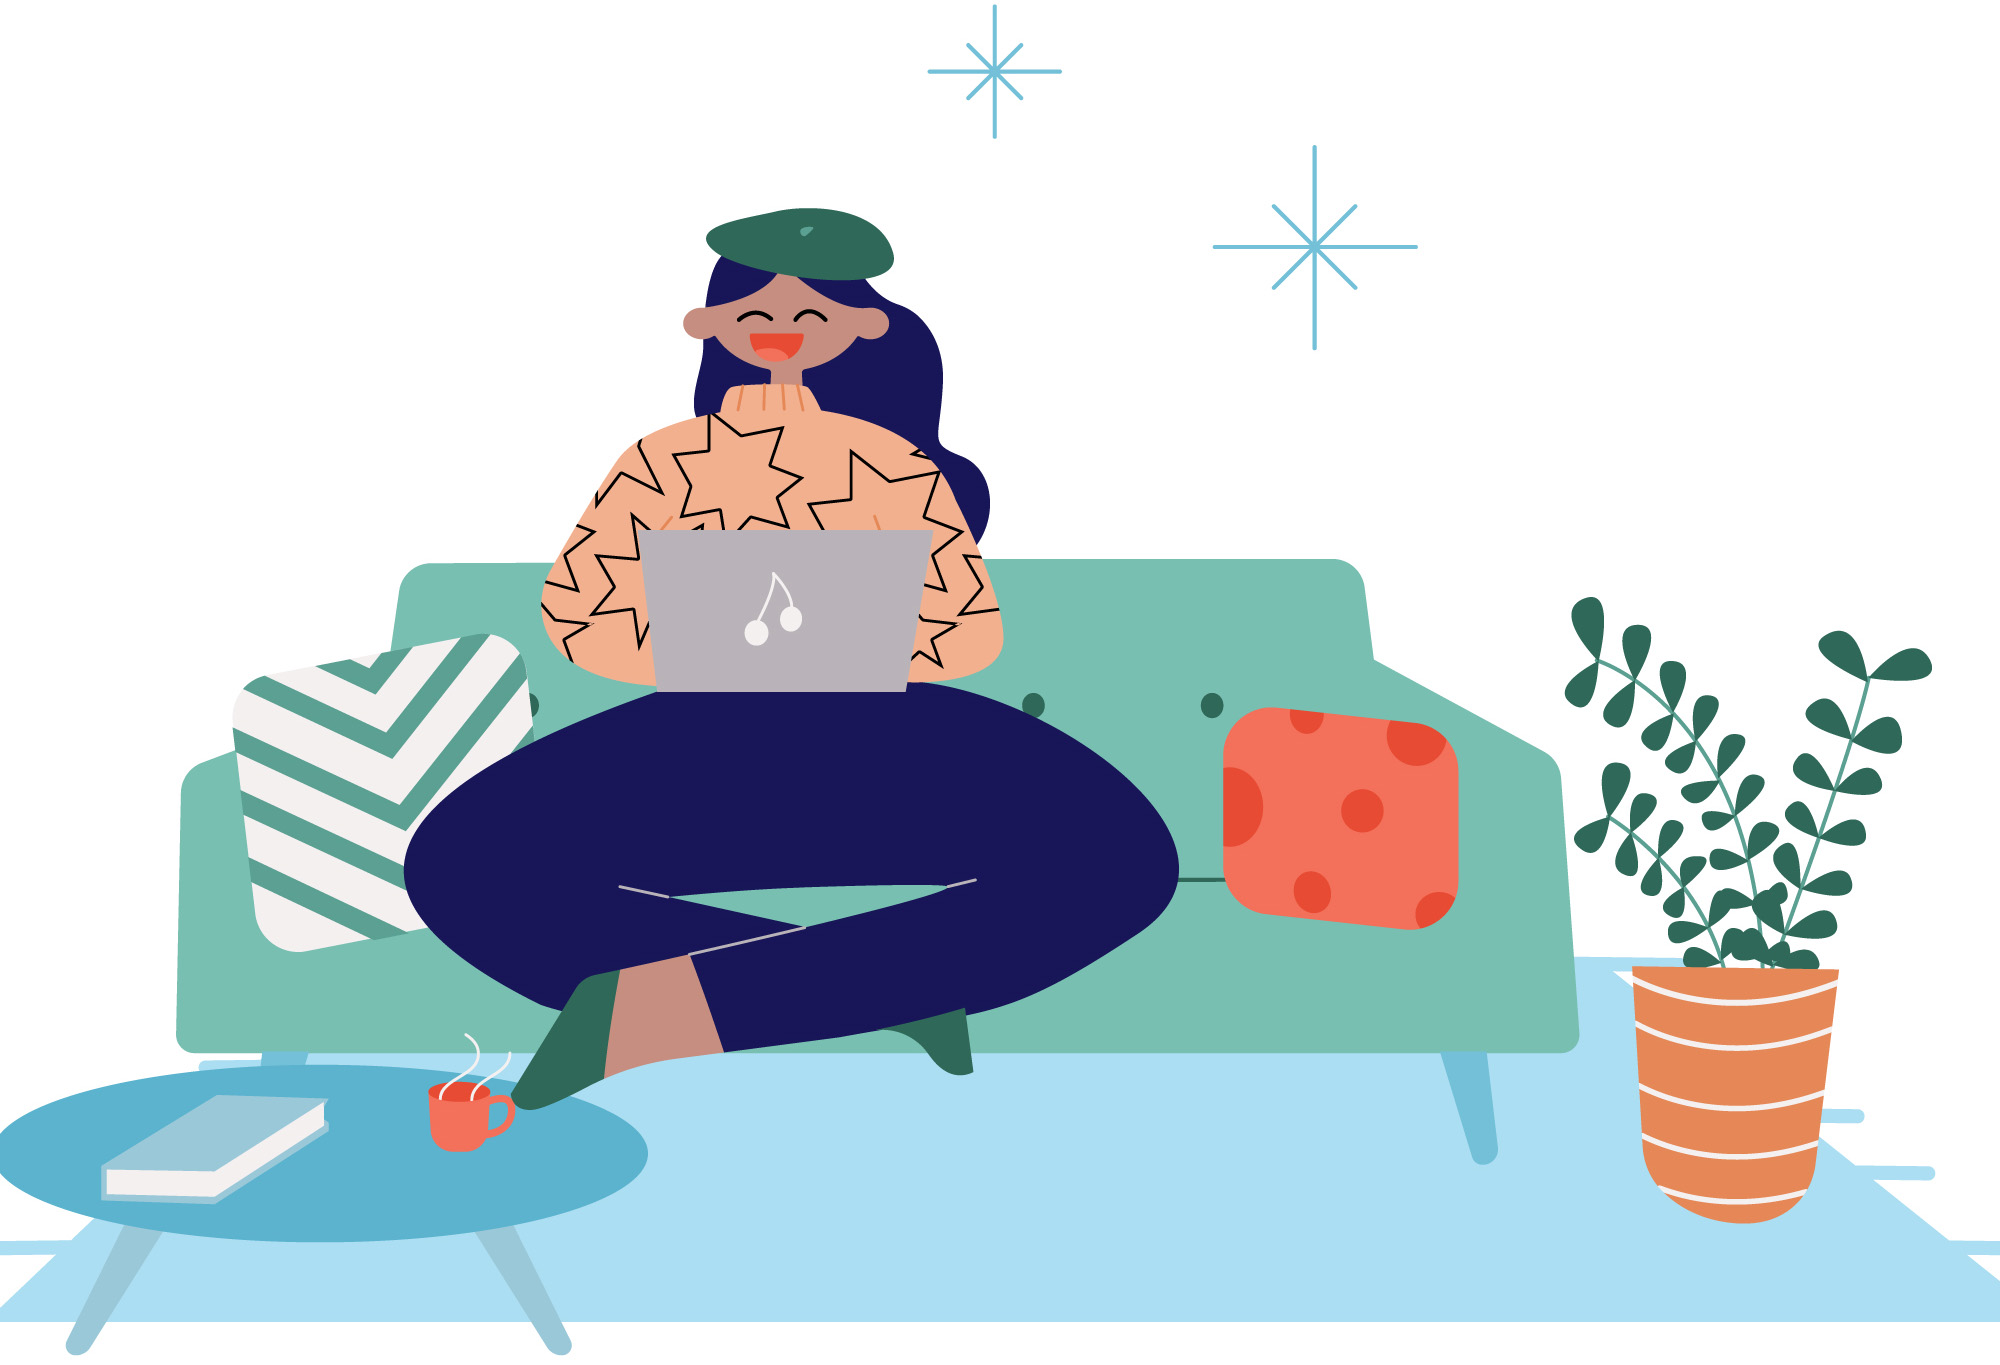 Illustration of an online learner with laptop sitting on couch